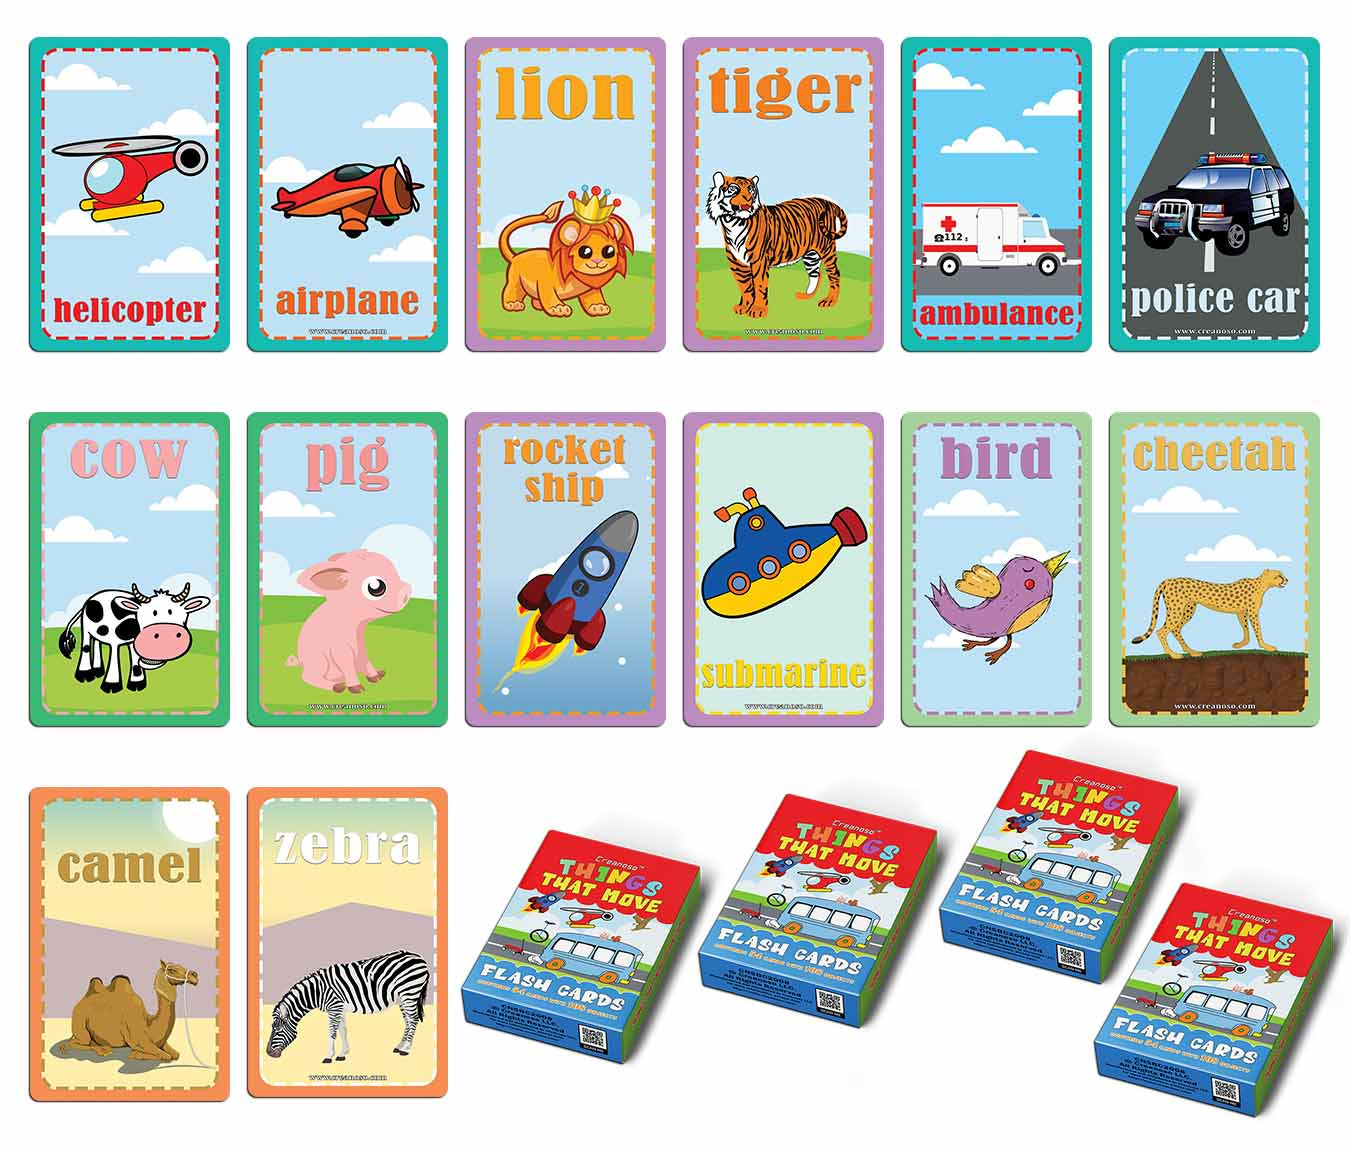 Educational Moving Things Flash Cards for Kids Bulk Set (4-Deck) - Pretty Favors Decor Decal Supply - Stocking Stuffers Gifts for Boys Girls Home Activities - High Quality Poker Size Standard Decks